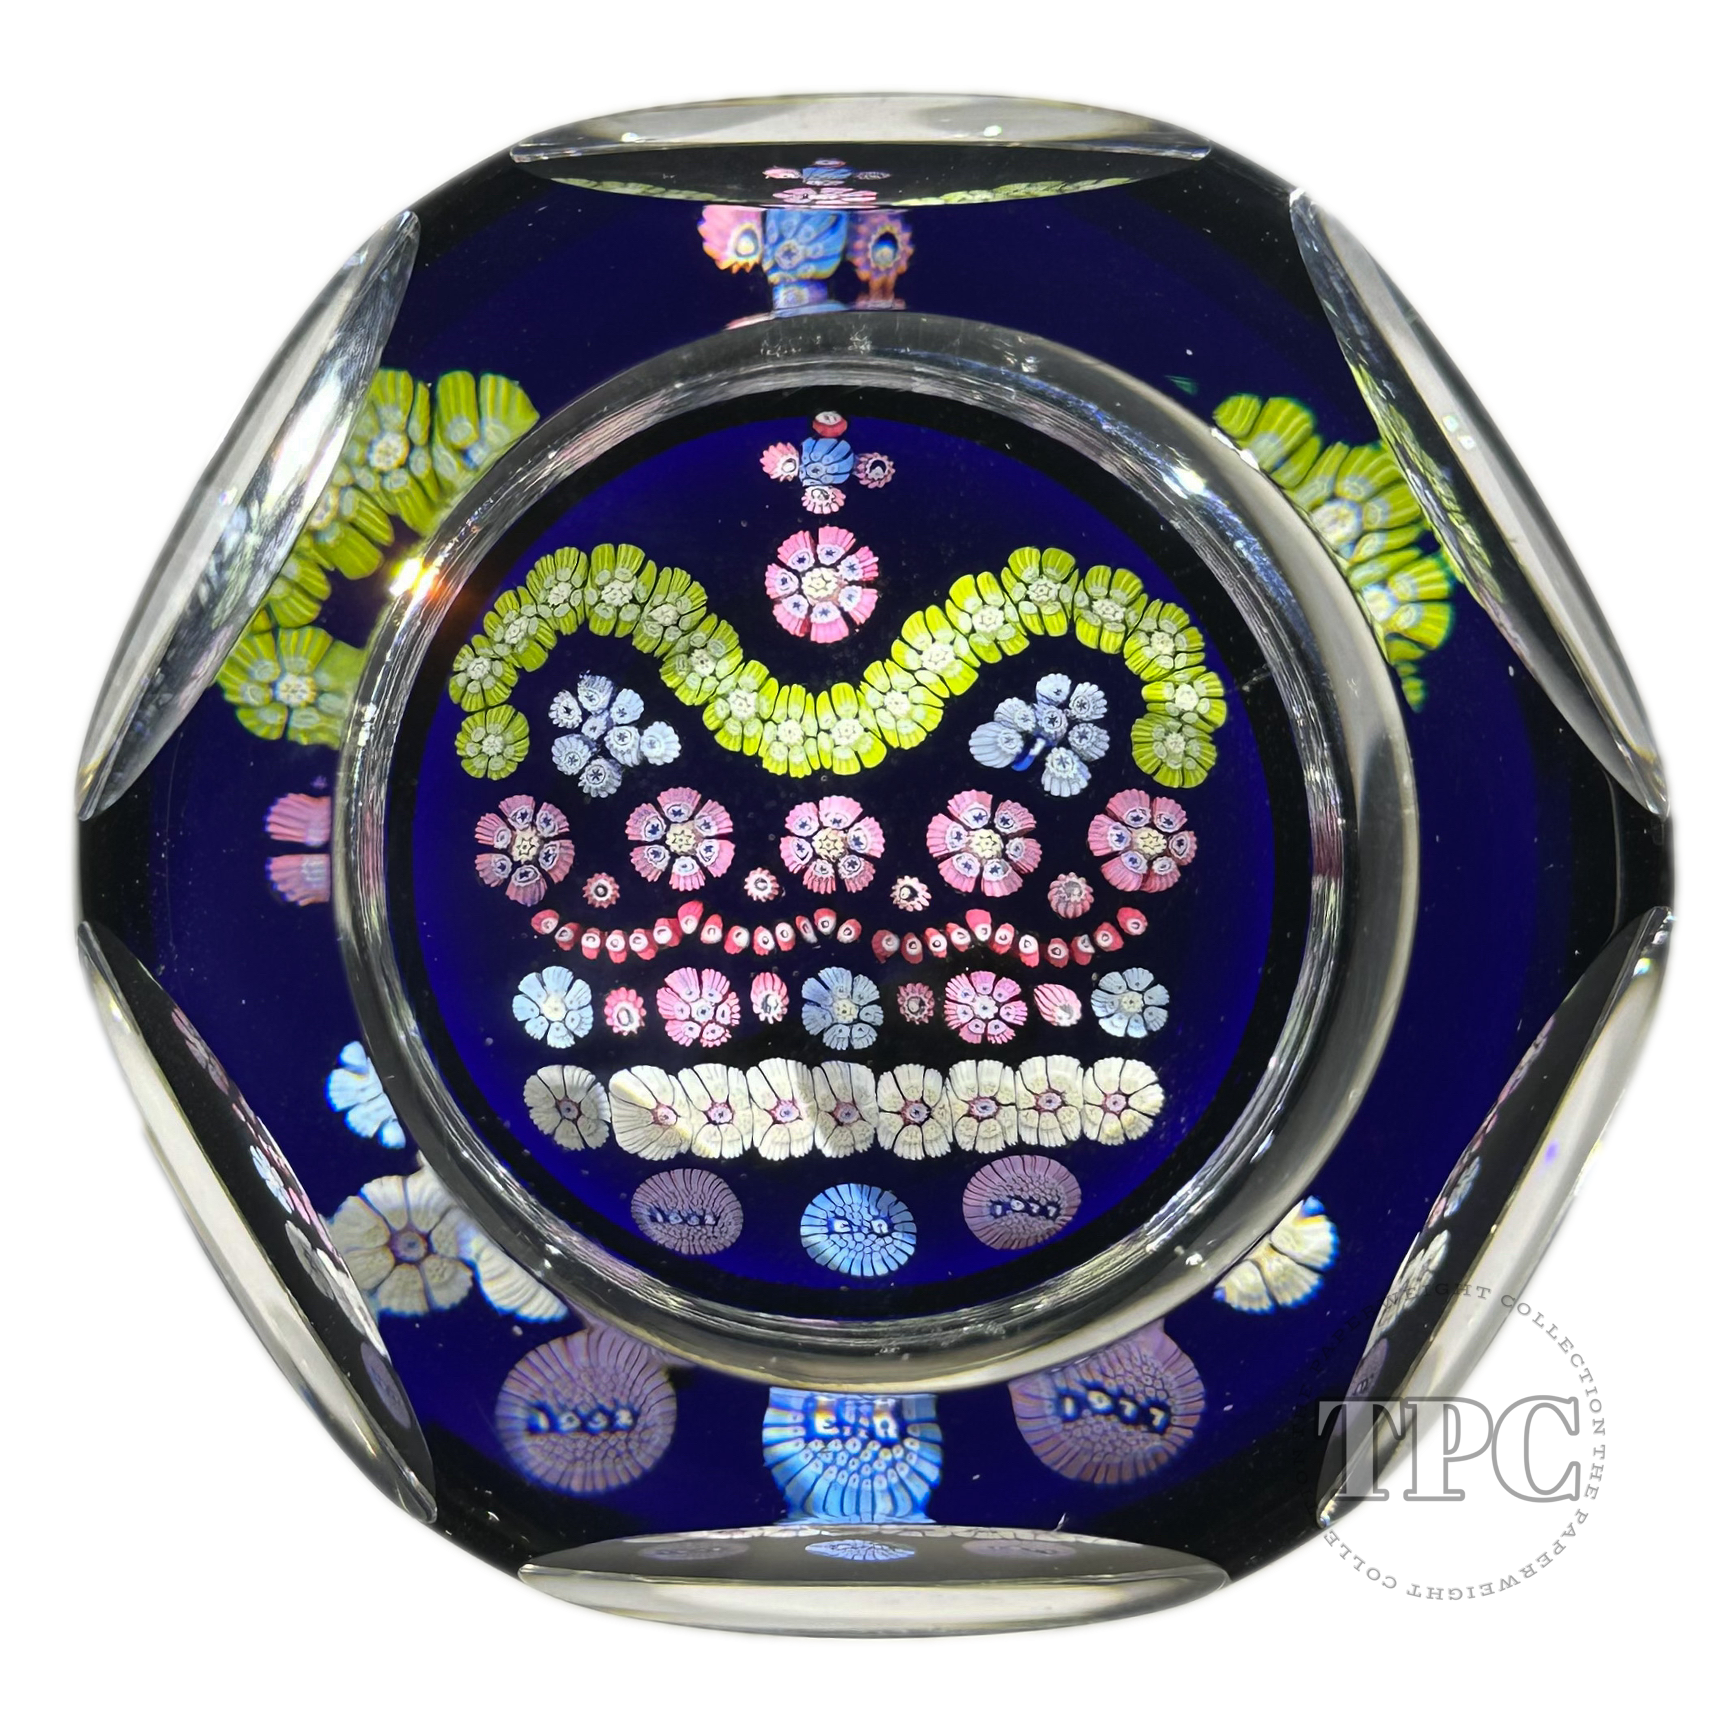 Whitefriars 1977 Glass Art Paperweight Queen's Silver Jubilee Patterned Complex Millefiori on Blue